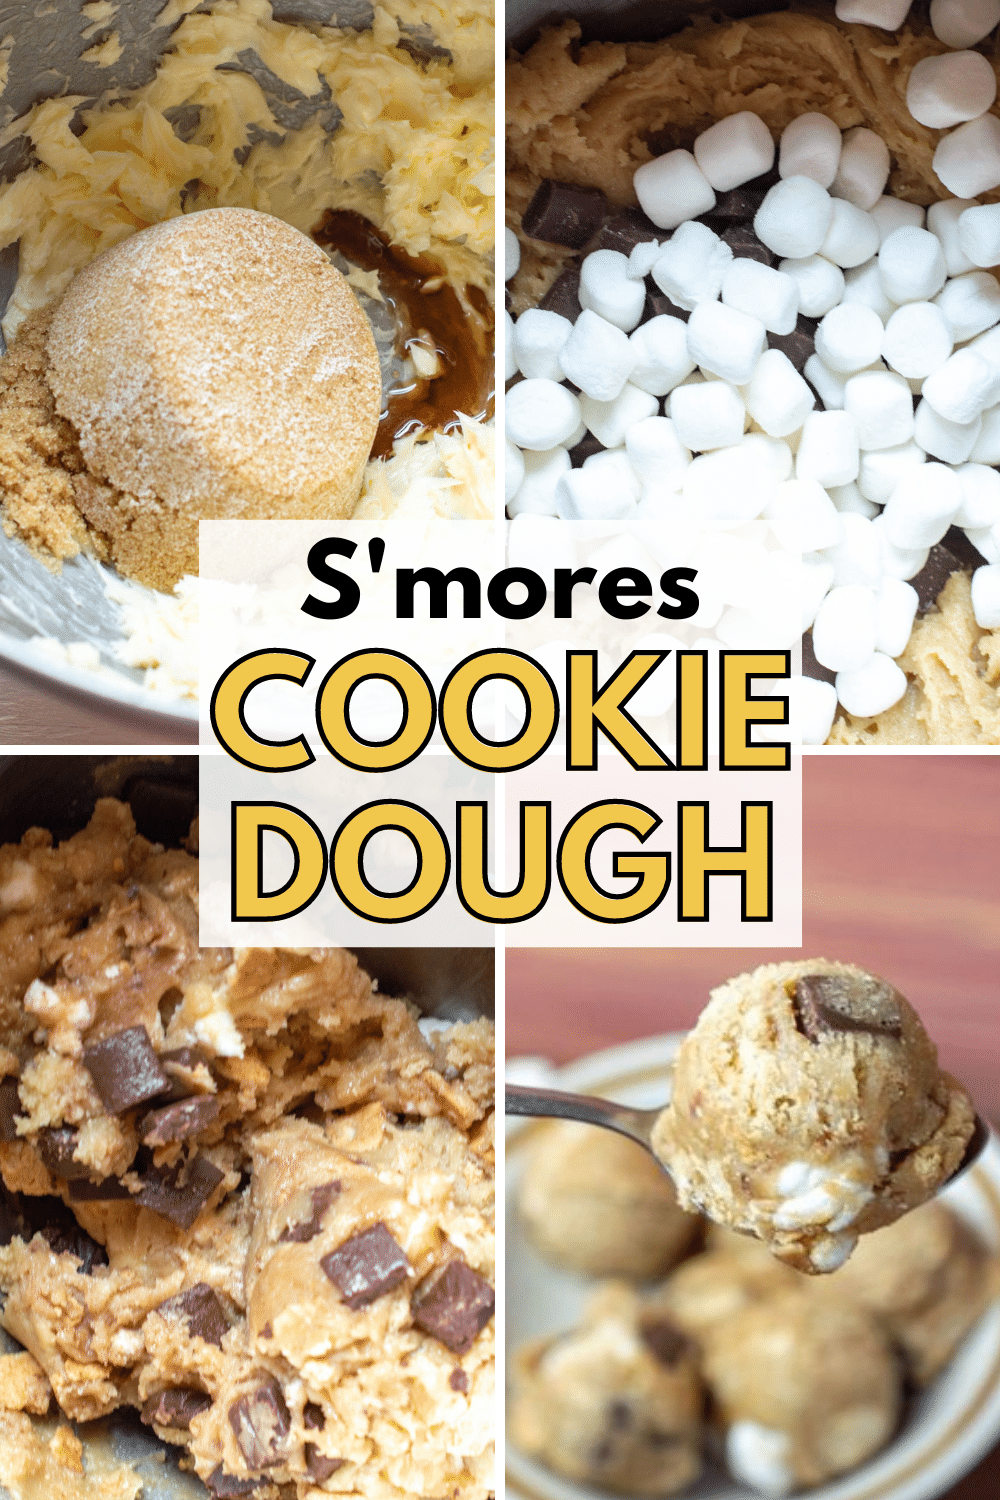 S'mores Cookie Dough is a delicious edible cookie dough that is packed with chocolate chunks, marshmallows and graham crackers for a big s'mores flavor. #smores #cookiedough #cookies via @wondermomwannab